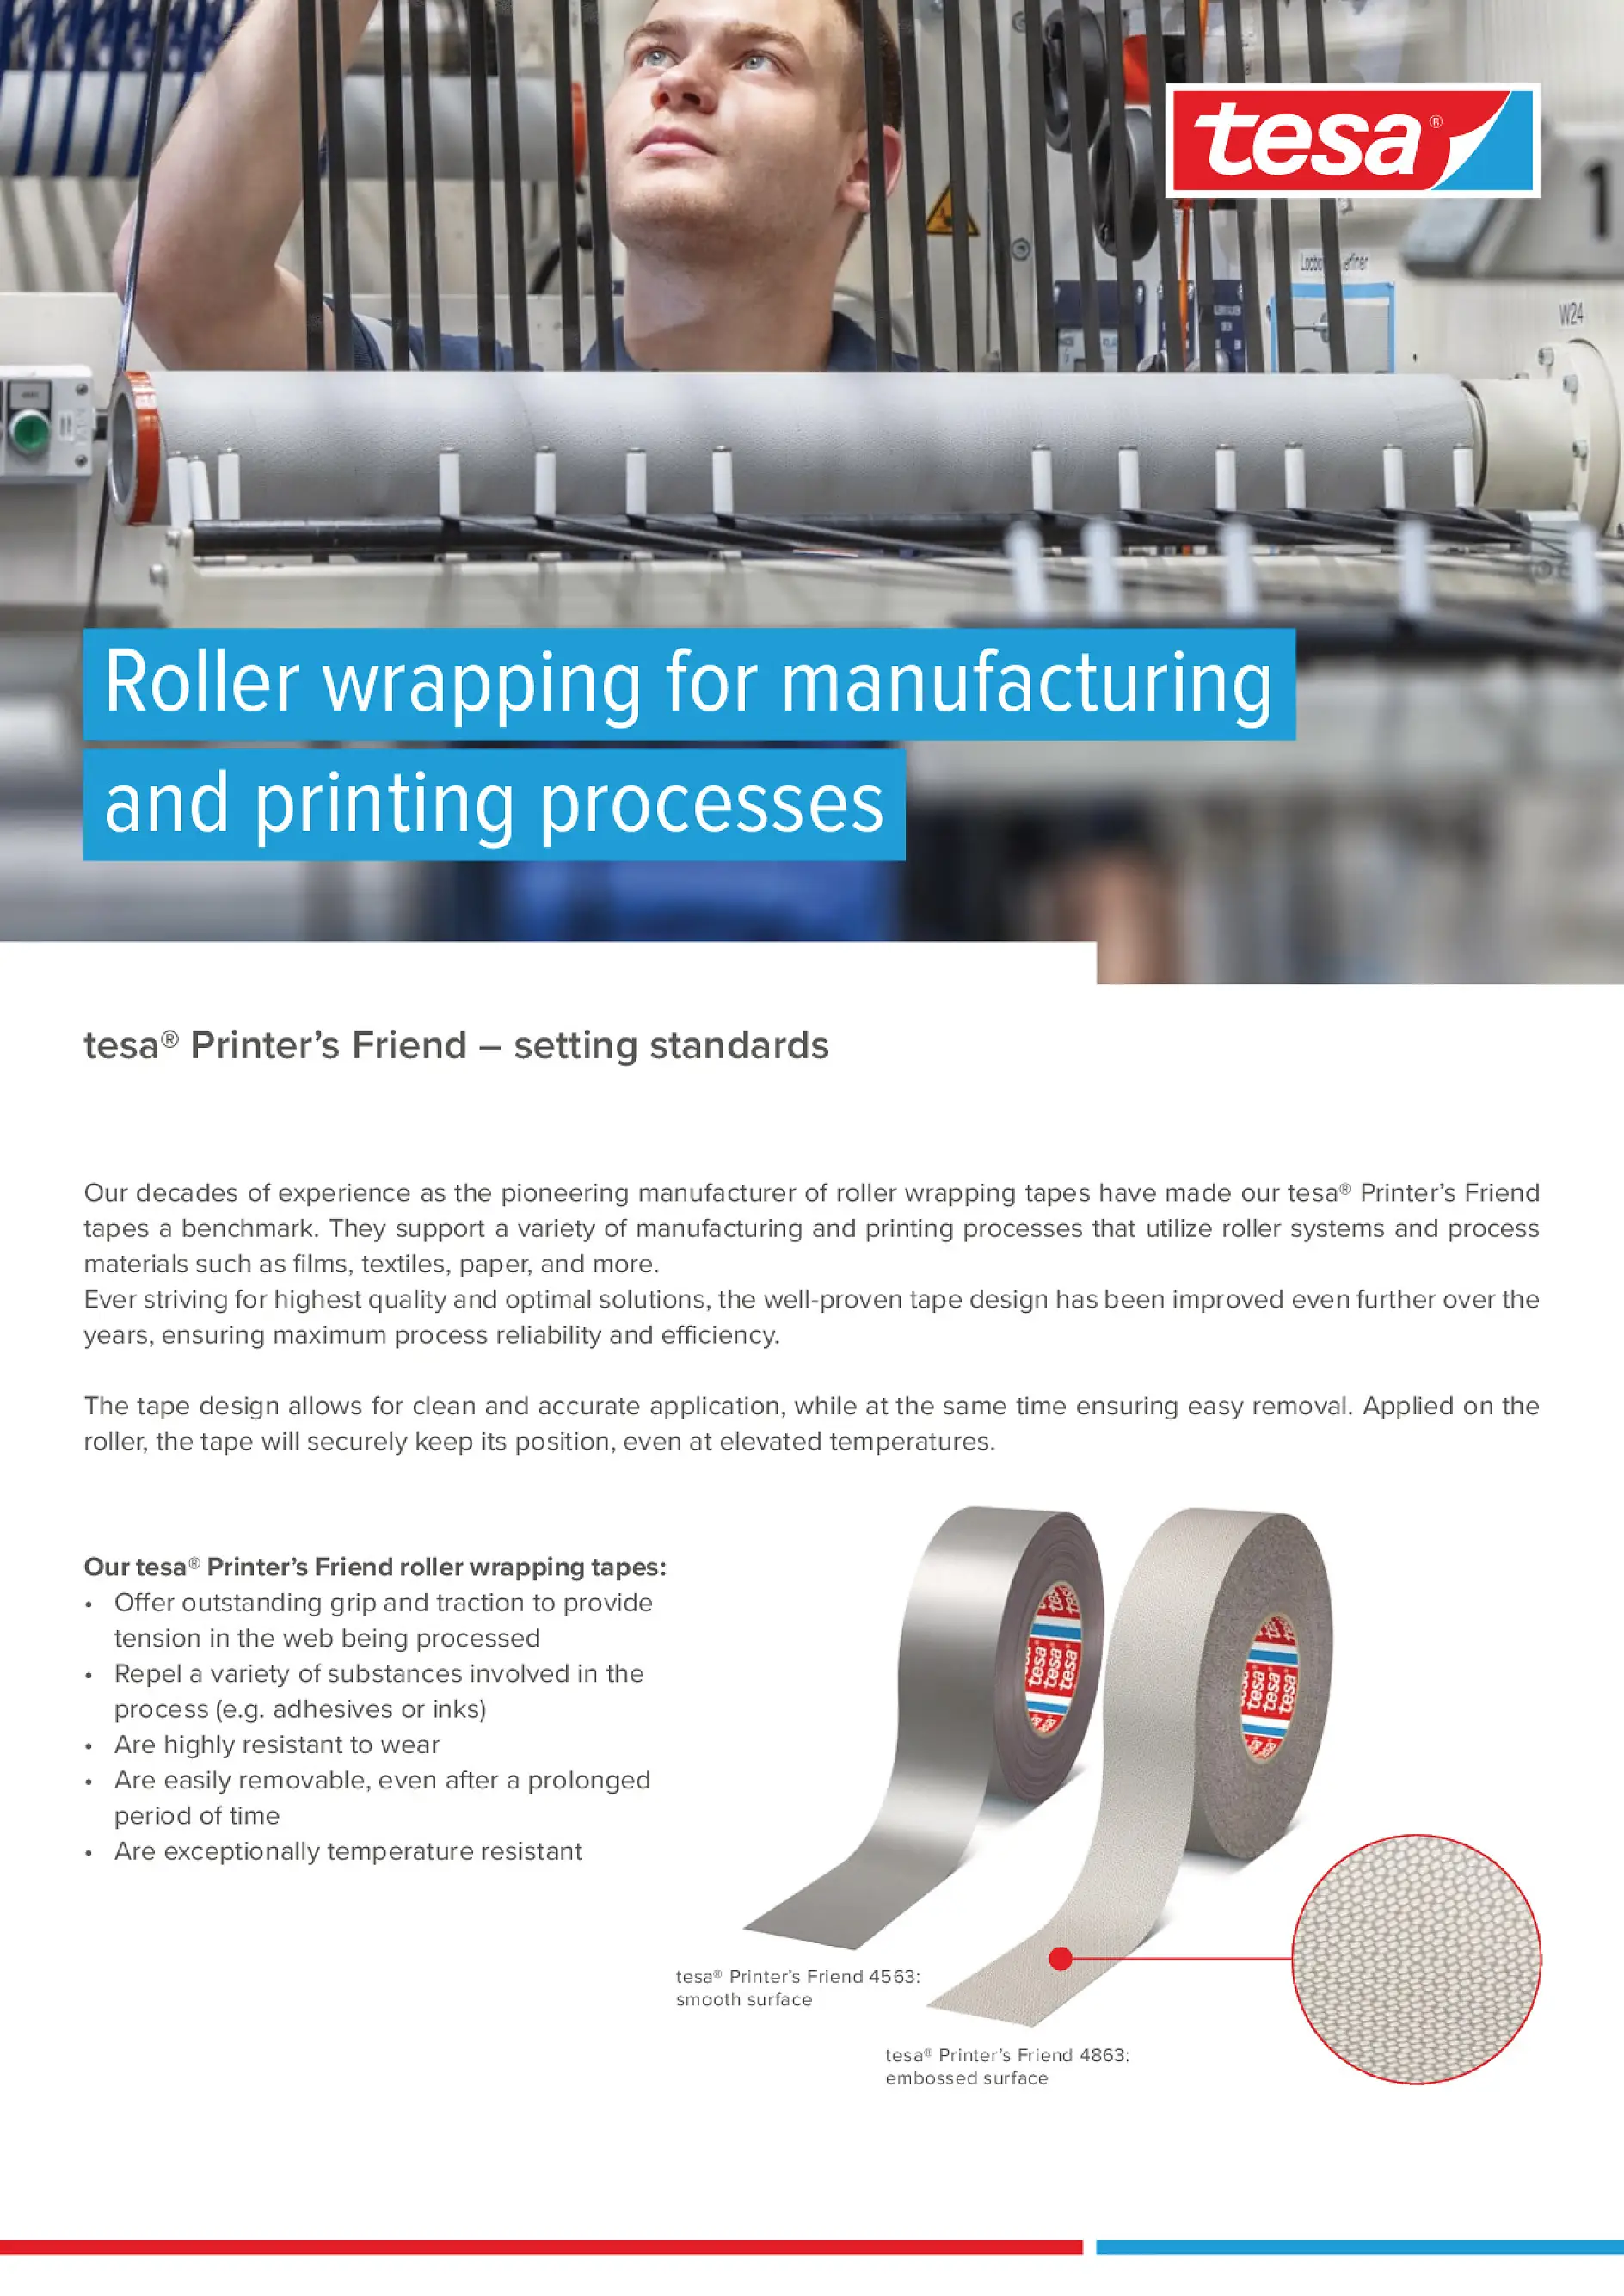 Roller wrapping for manufacturing and printing processes